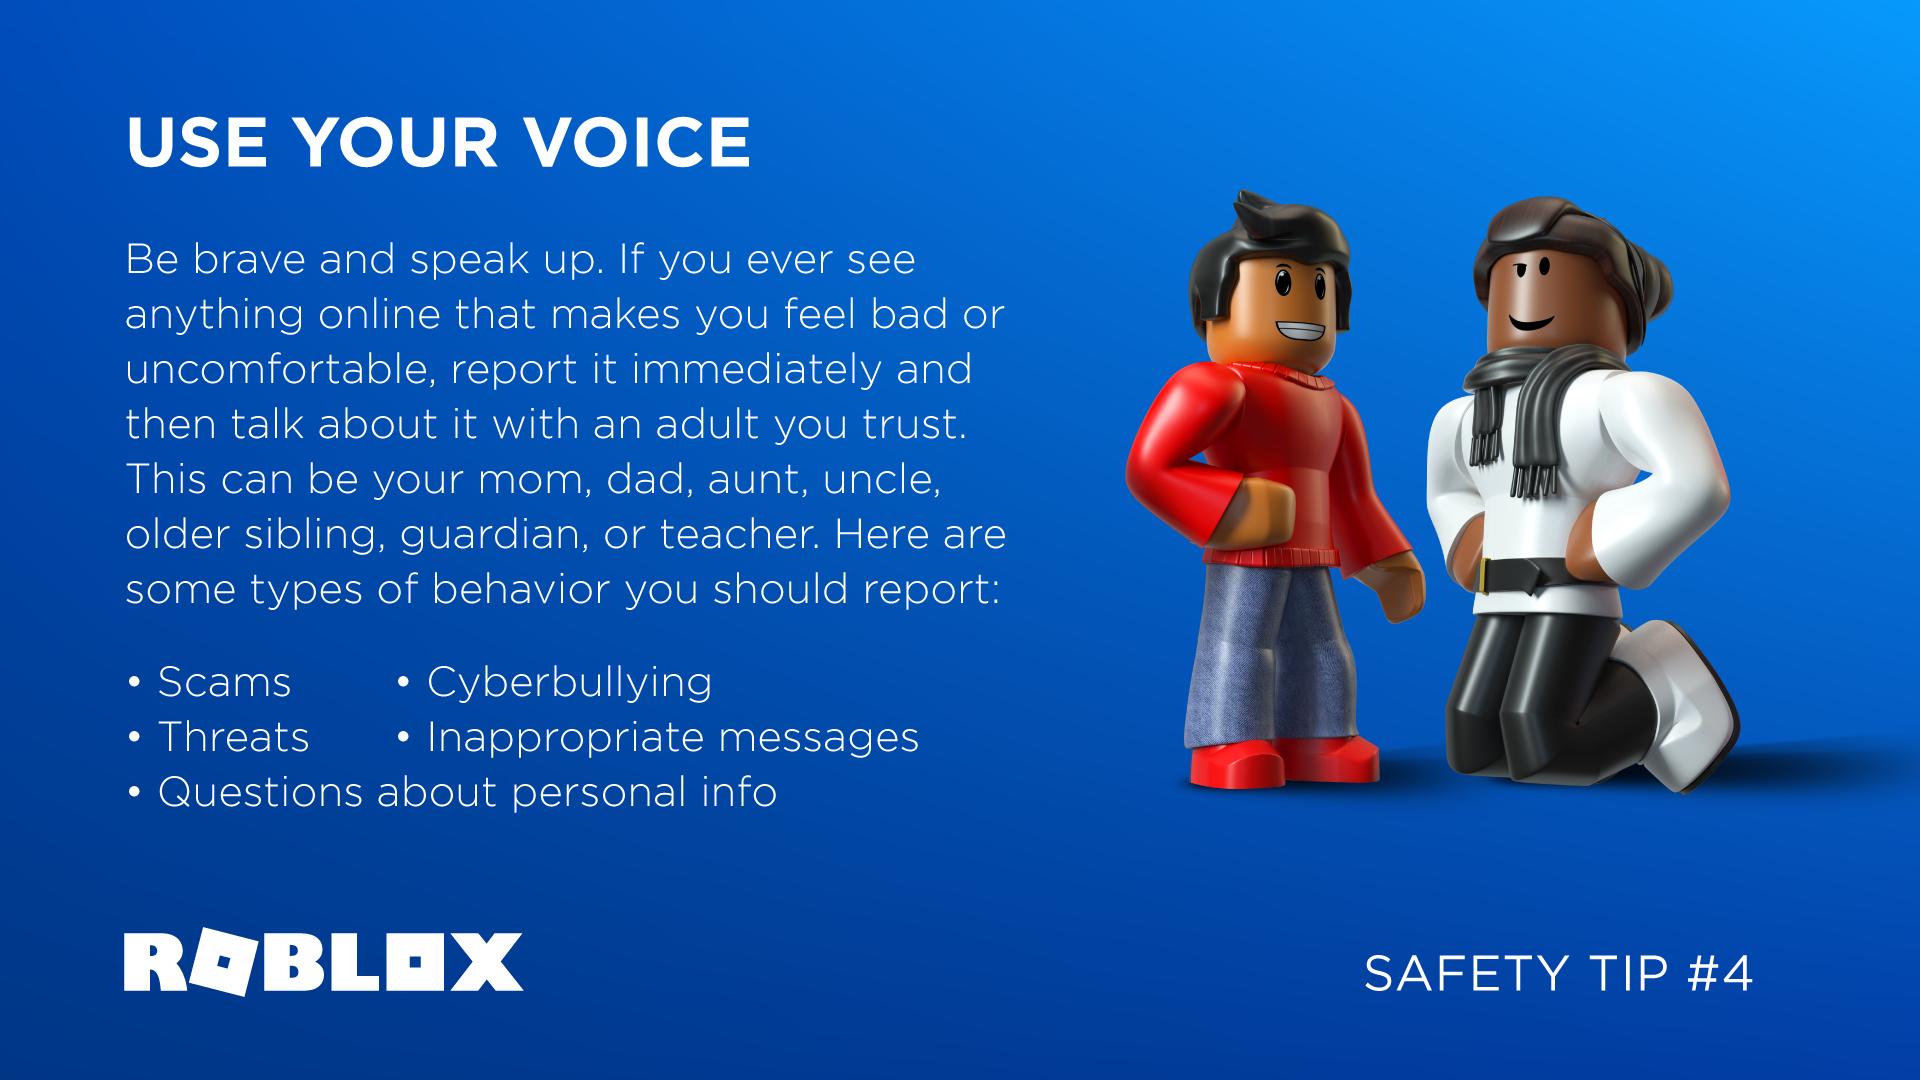 roblox safety tip voice ripoff hesitate speak something report positive reporting learning tools don